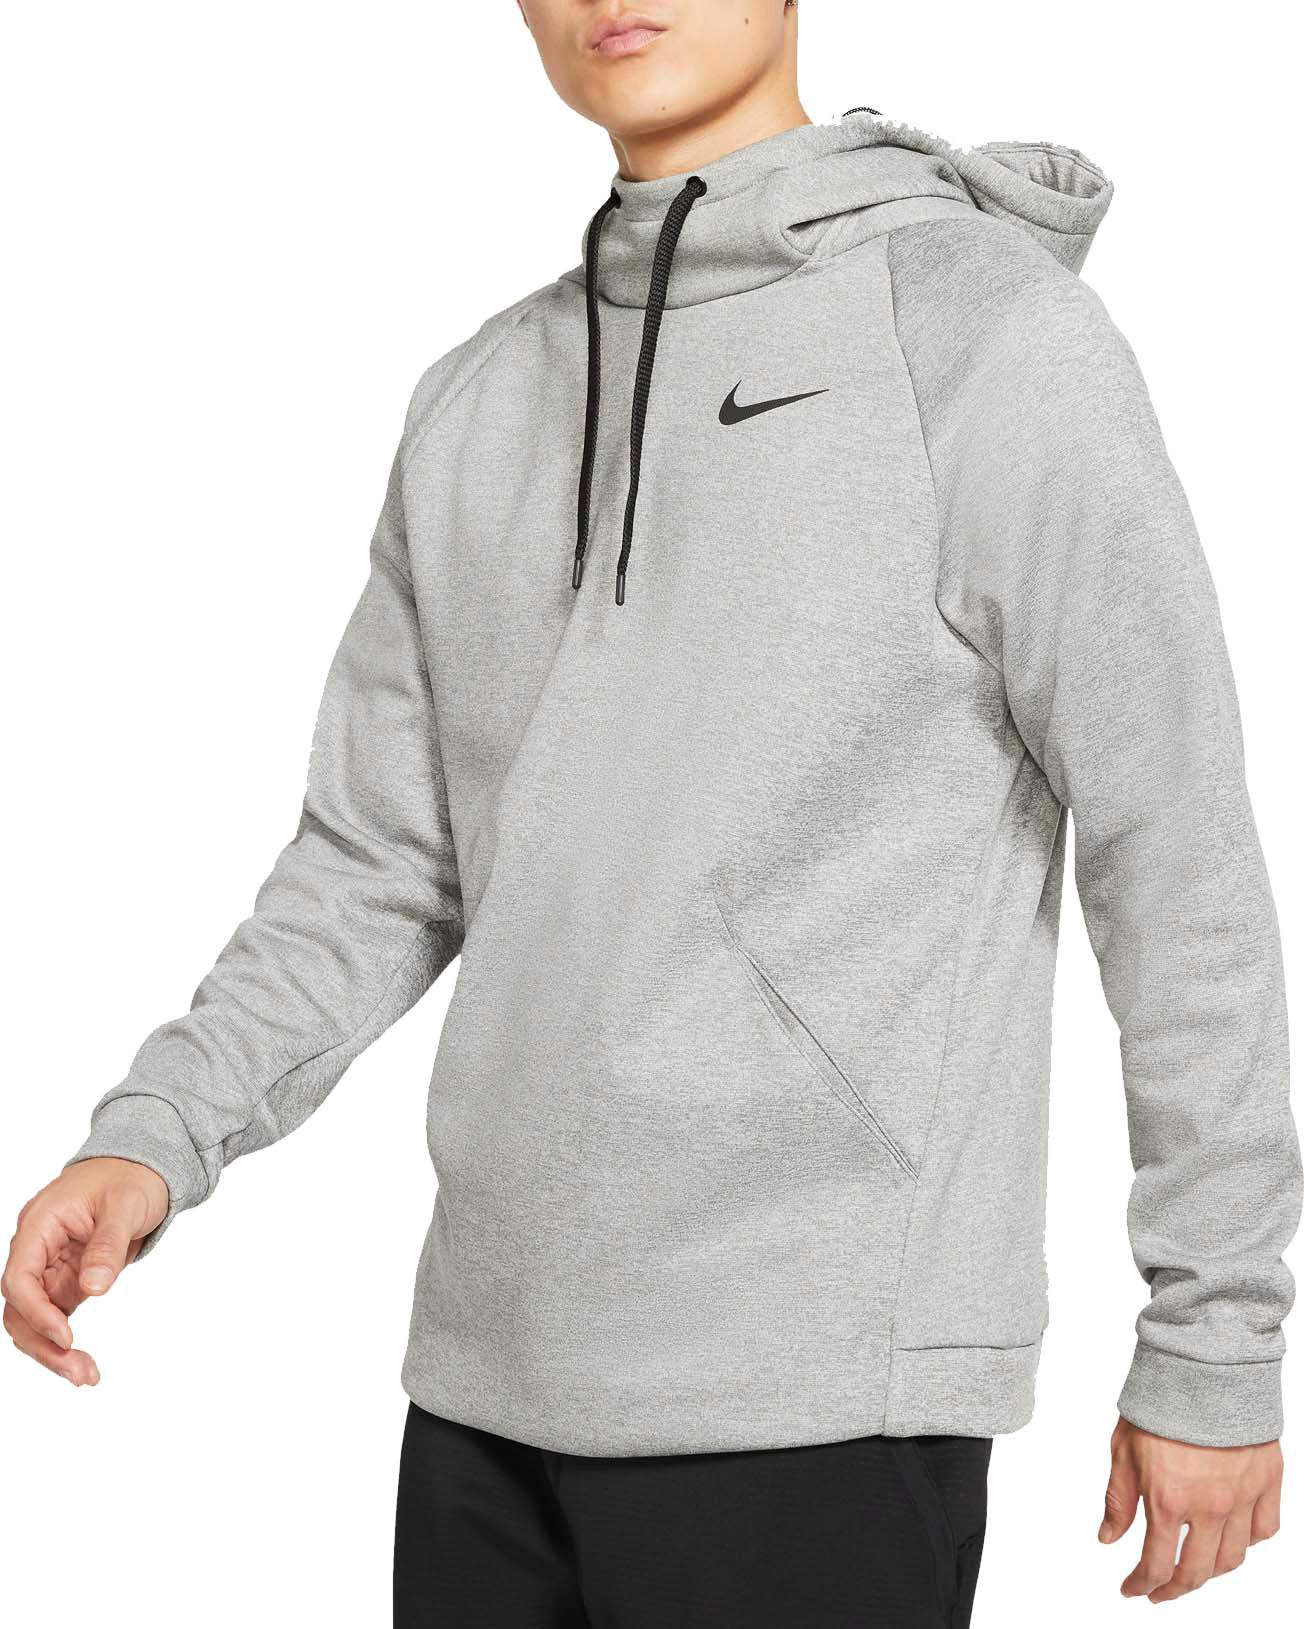 nike pullover hoodie size chart